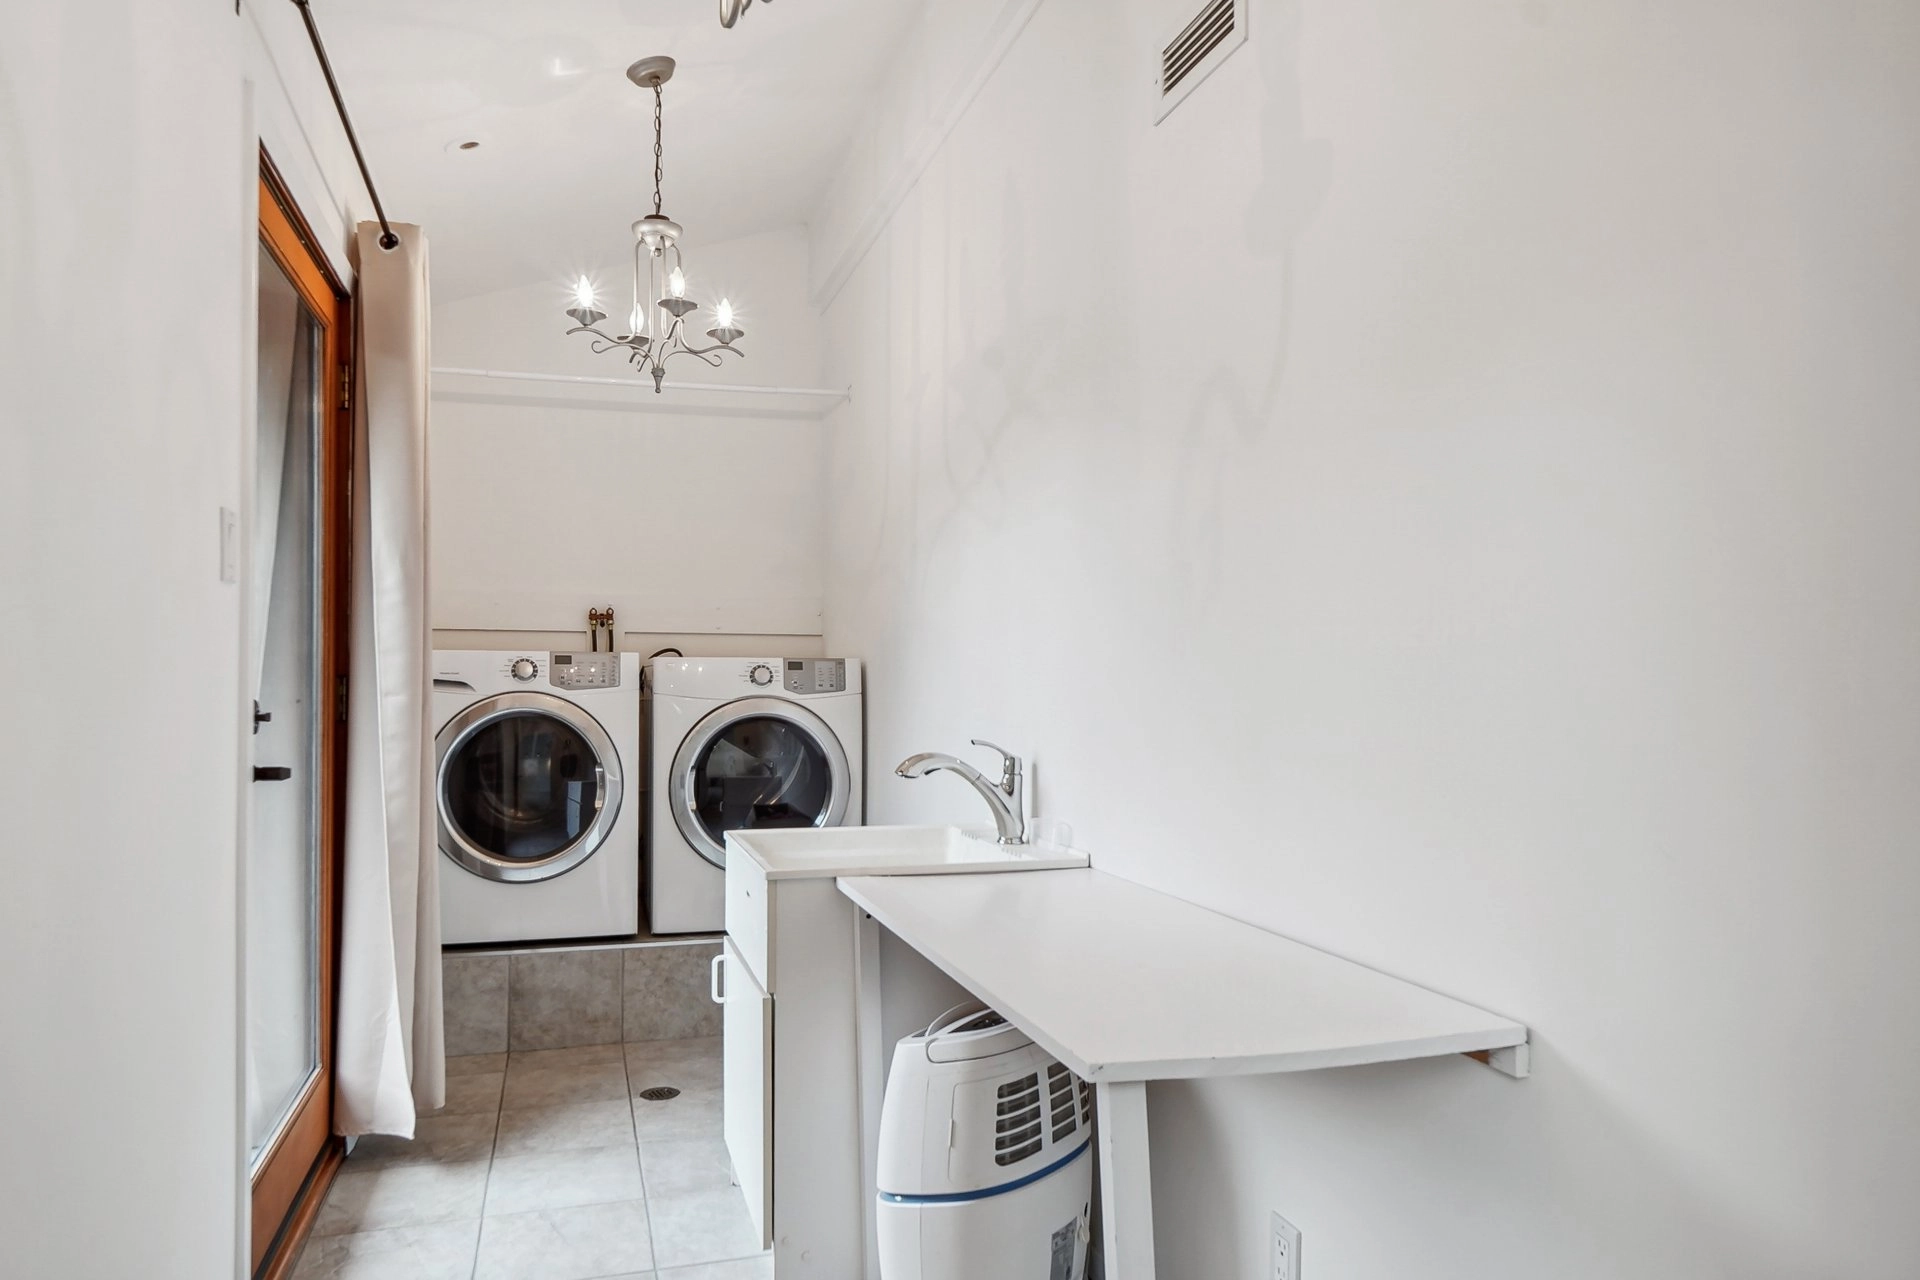 Spacious and functional laundry room